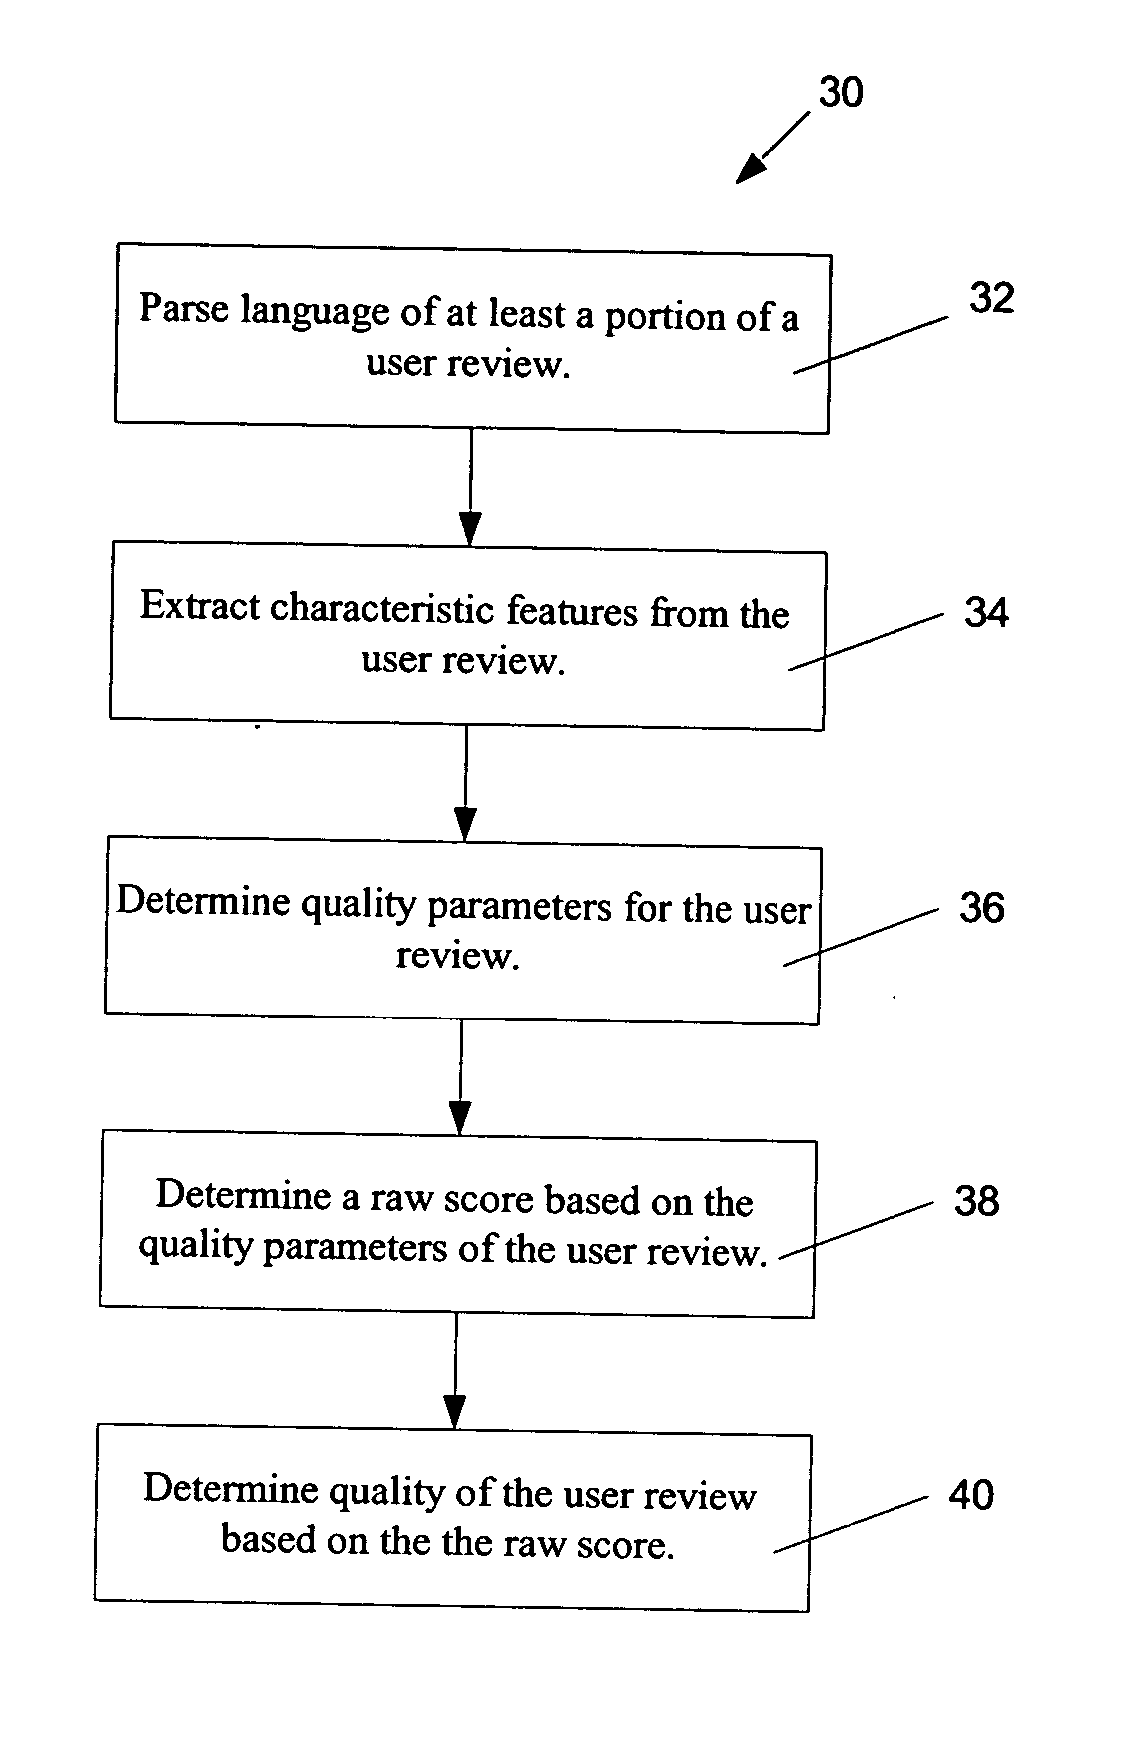 System and method for determining quality of written product reviews in an automated manner